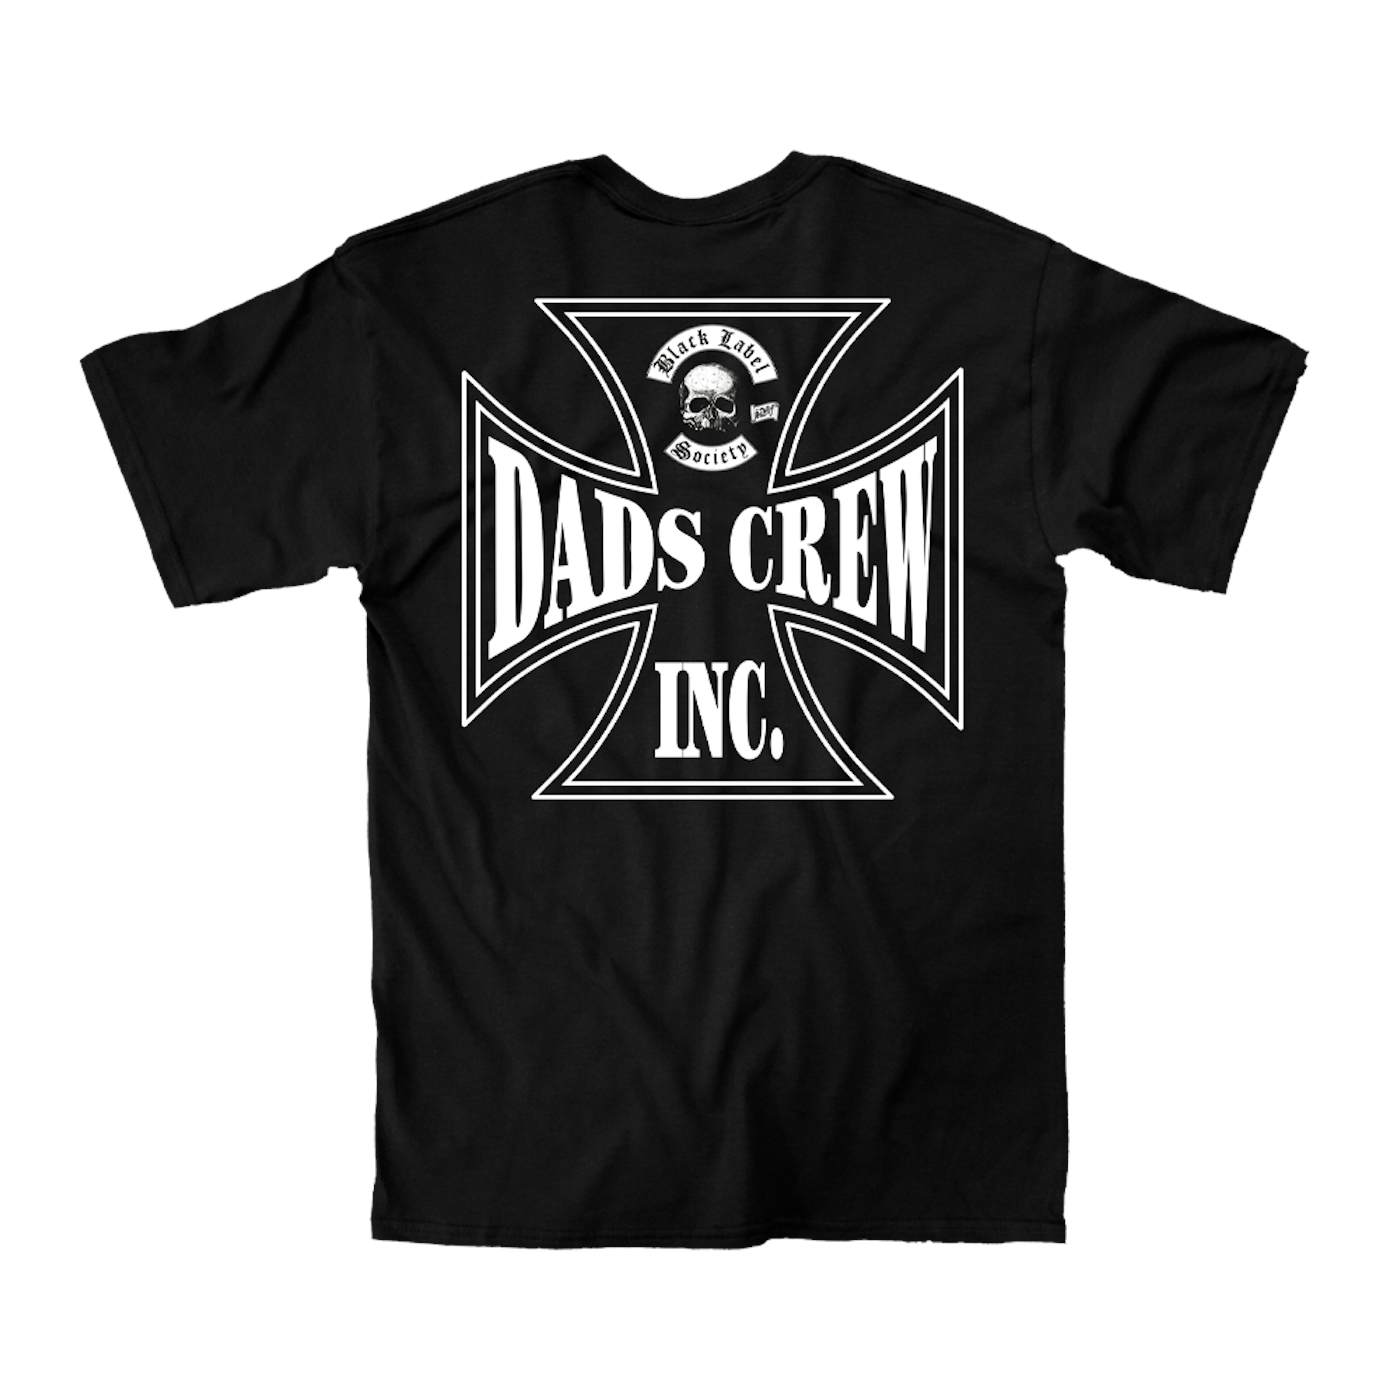 Black Label Society Father's Day "Dad Crew Inc." Tee